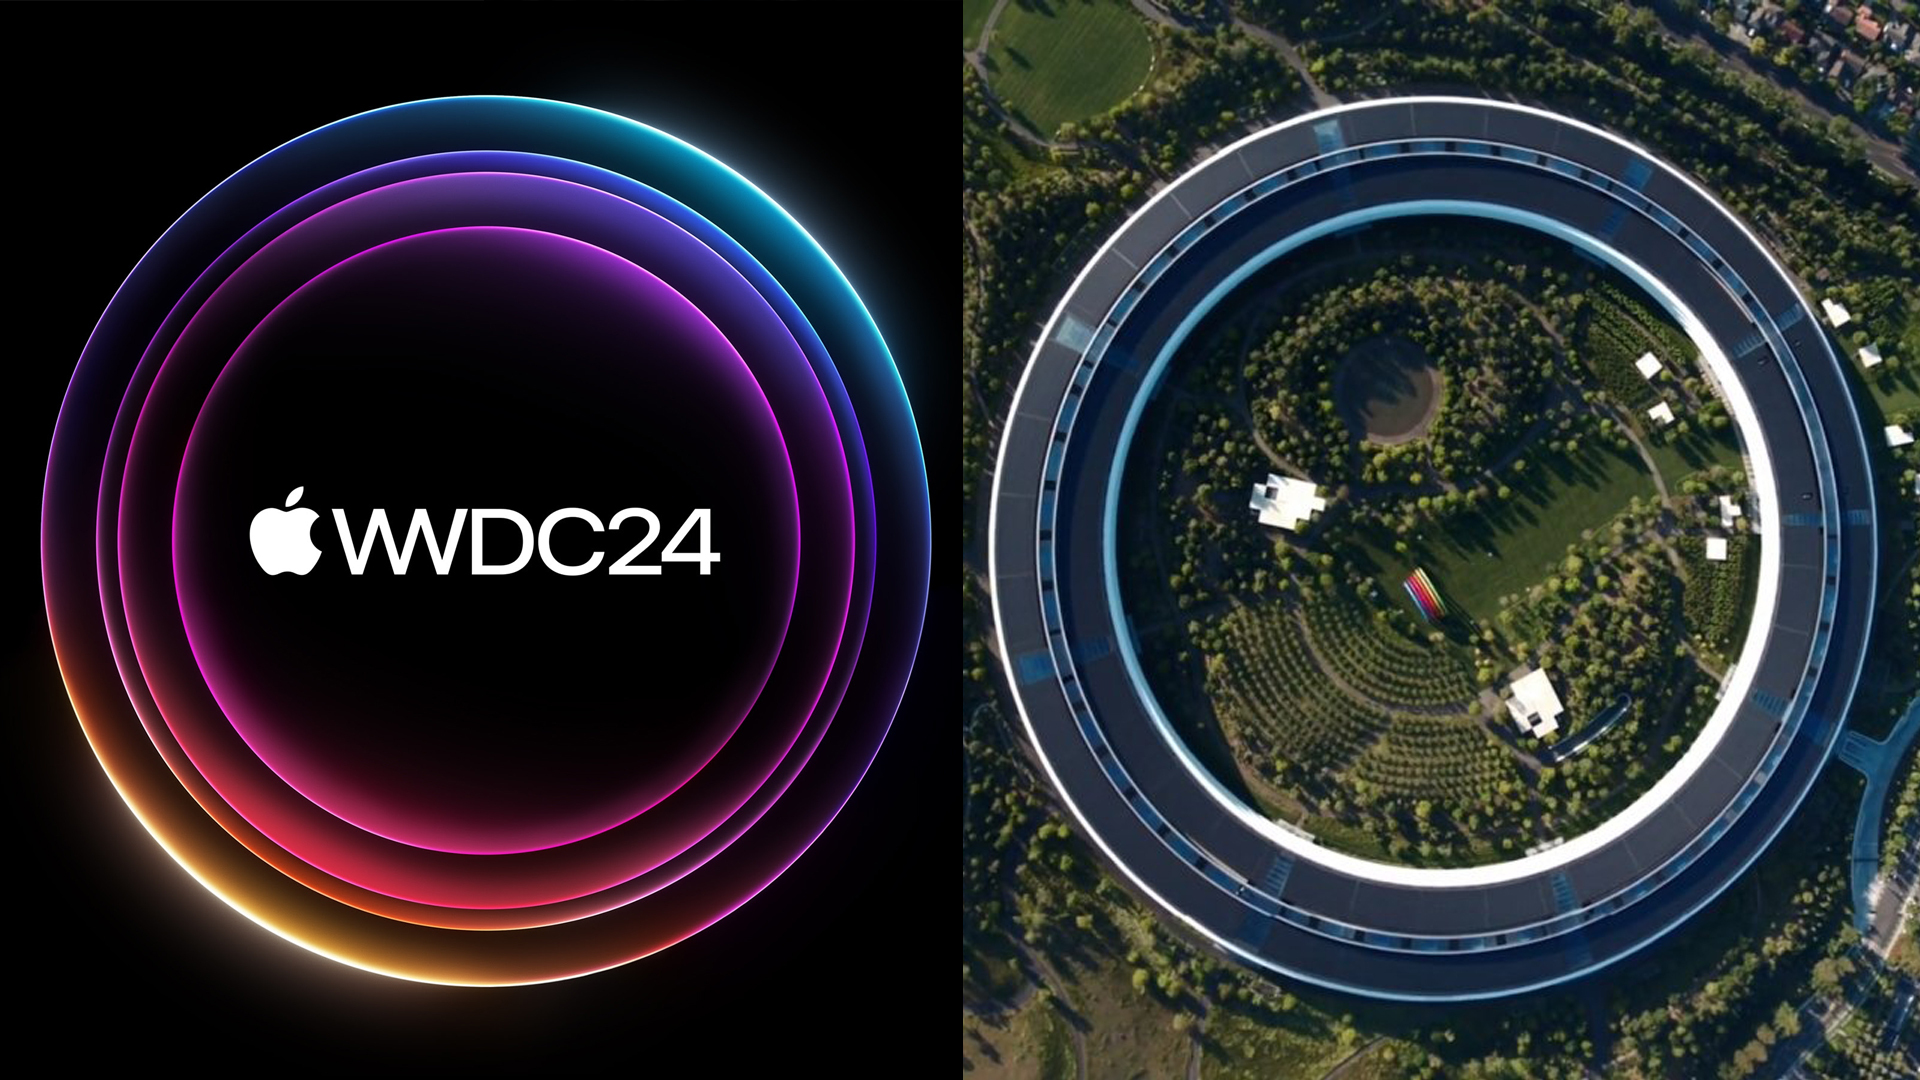 WWDC 2024 Event Logo and Apple Park Campus